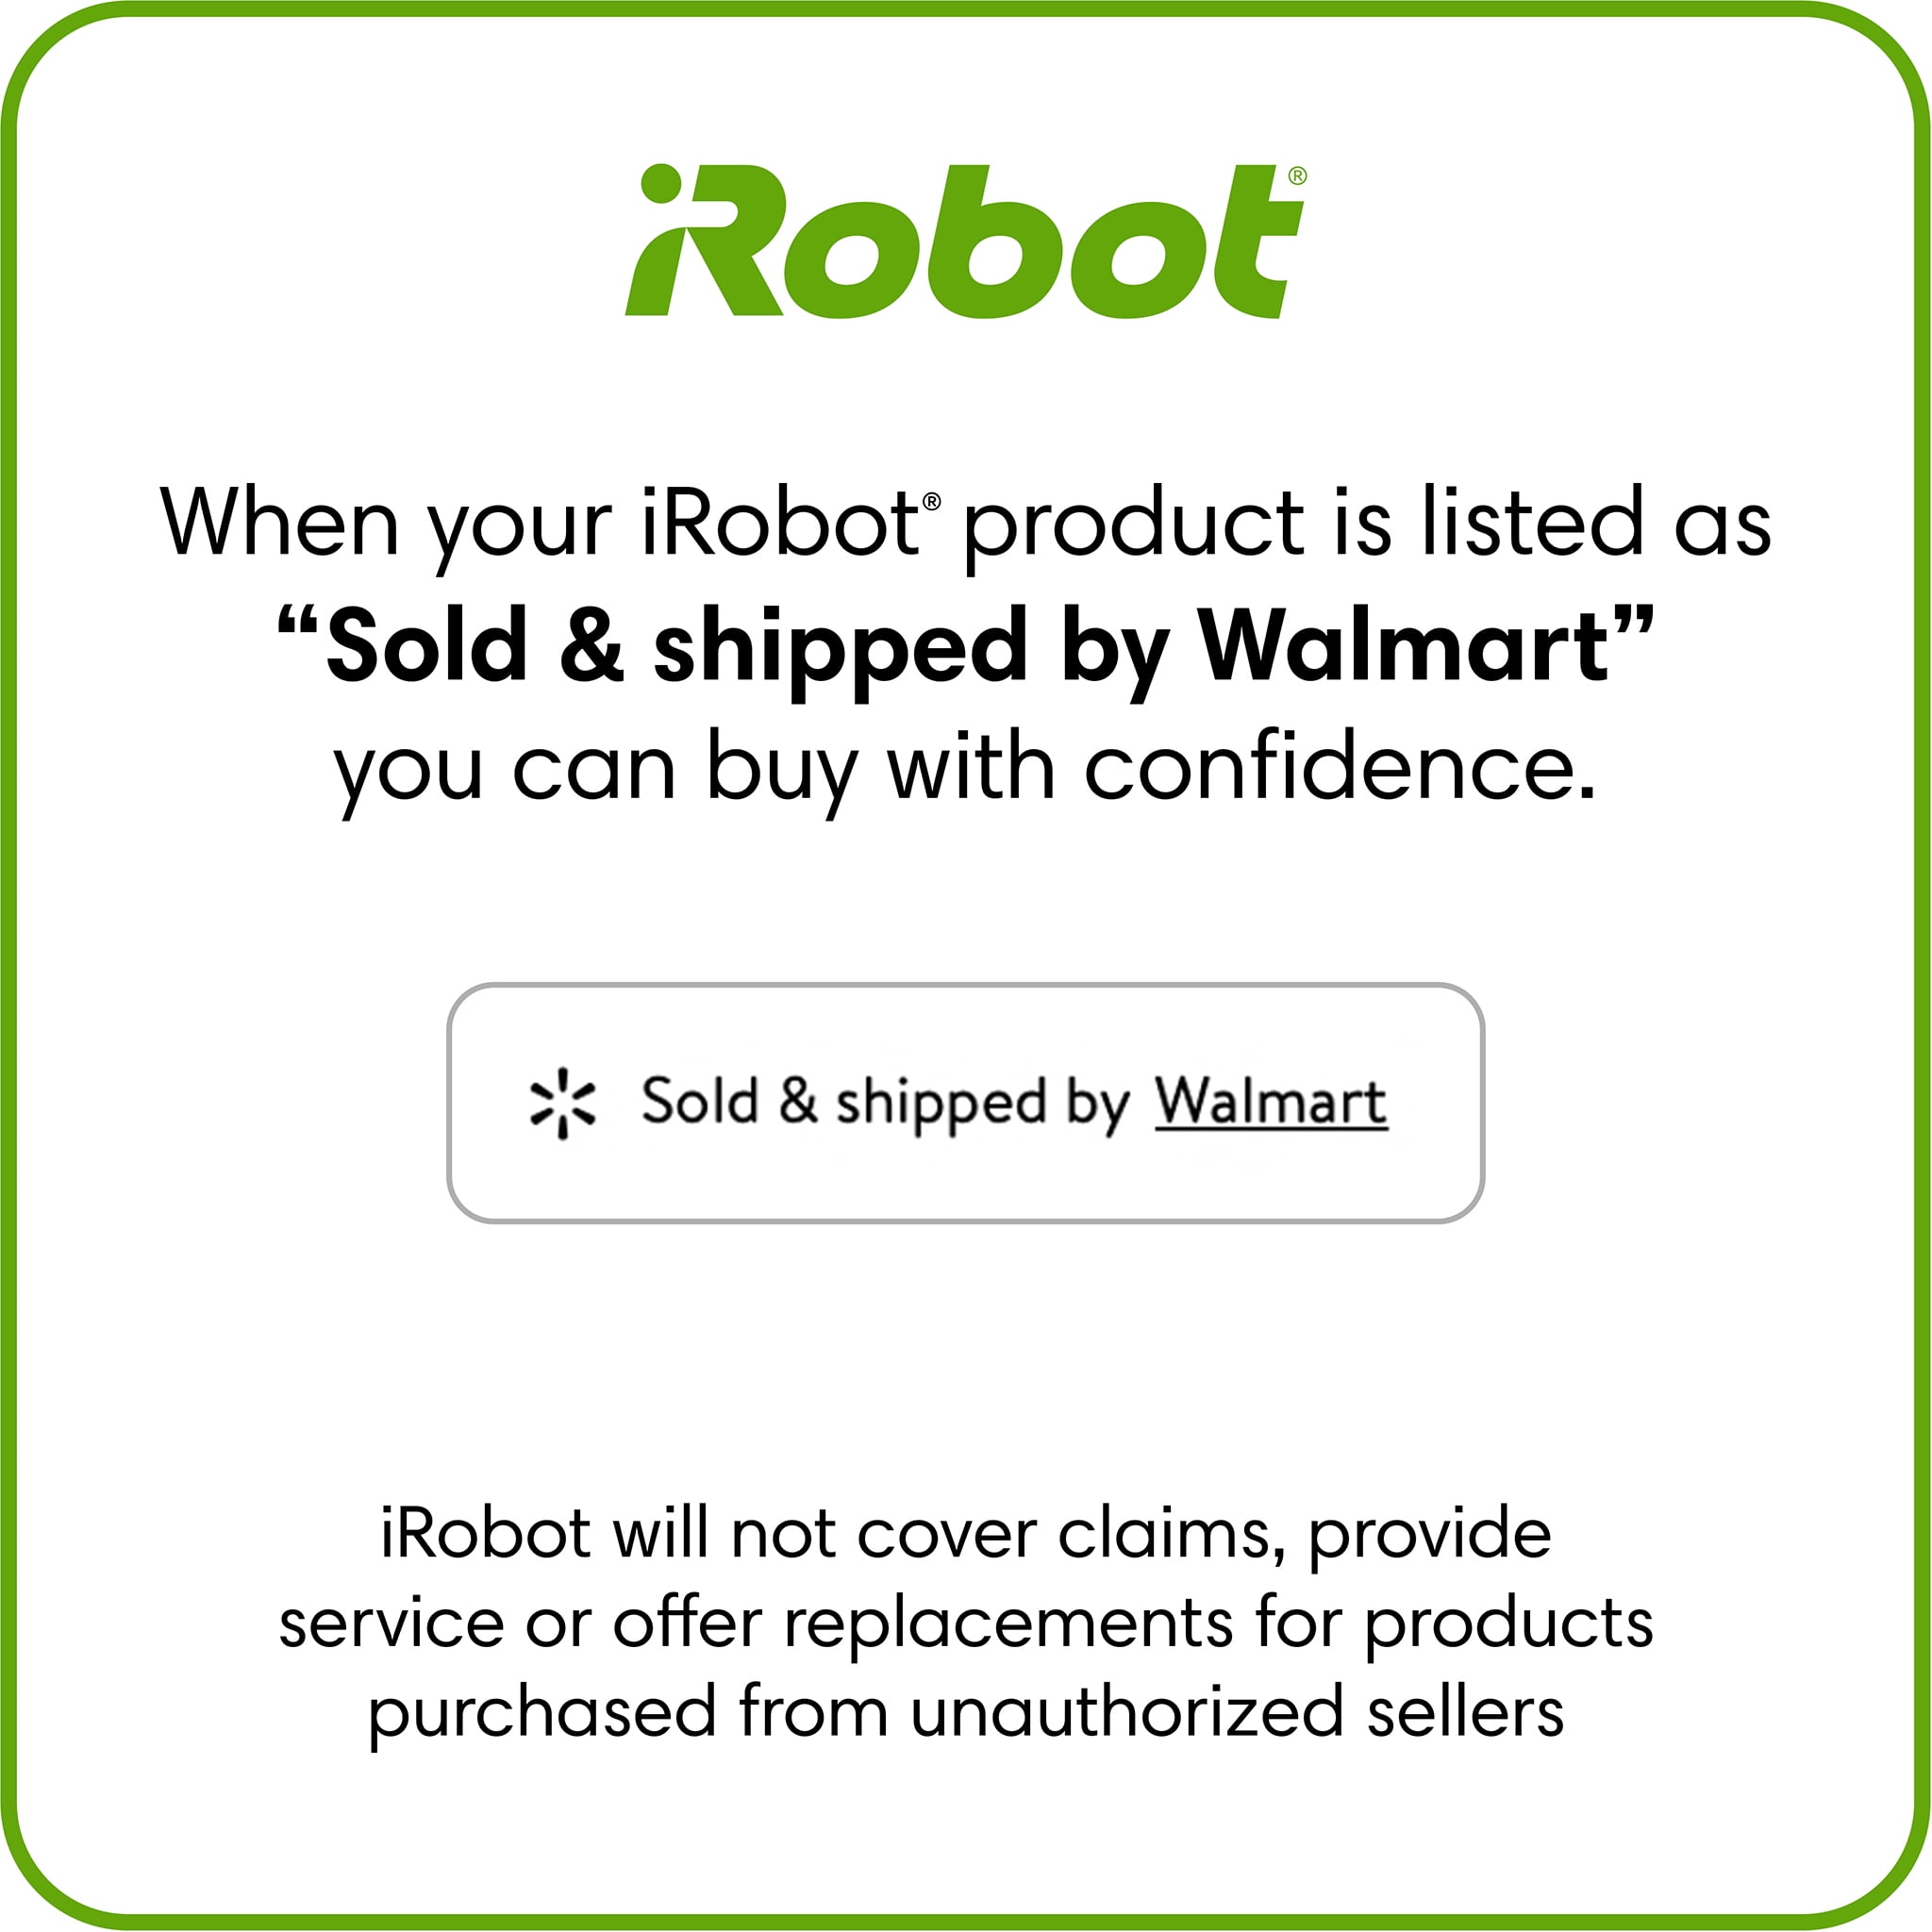 iRobot® Roomba I1 (1152) Wi-fi® … curated on LTK